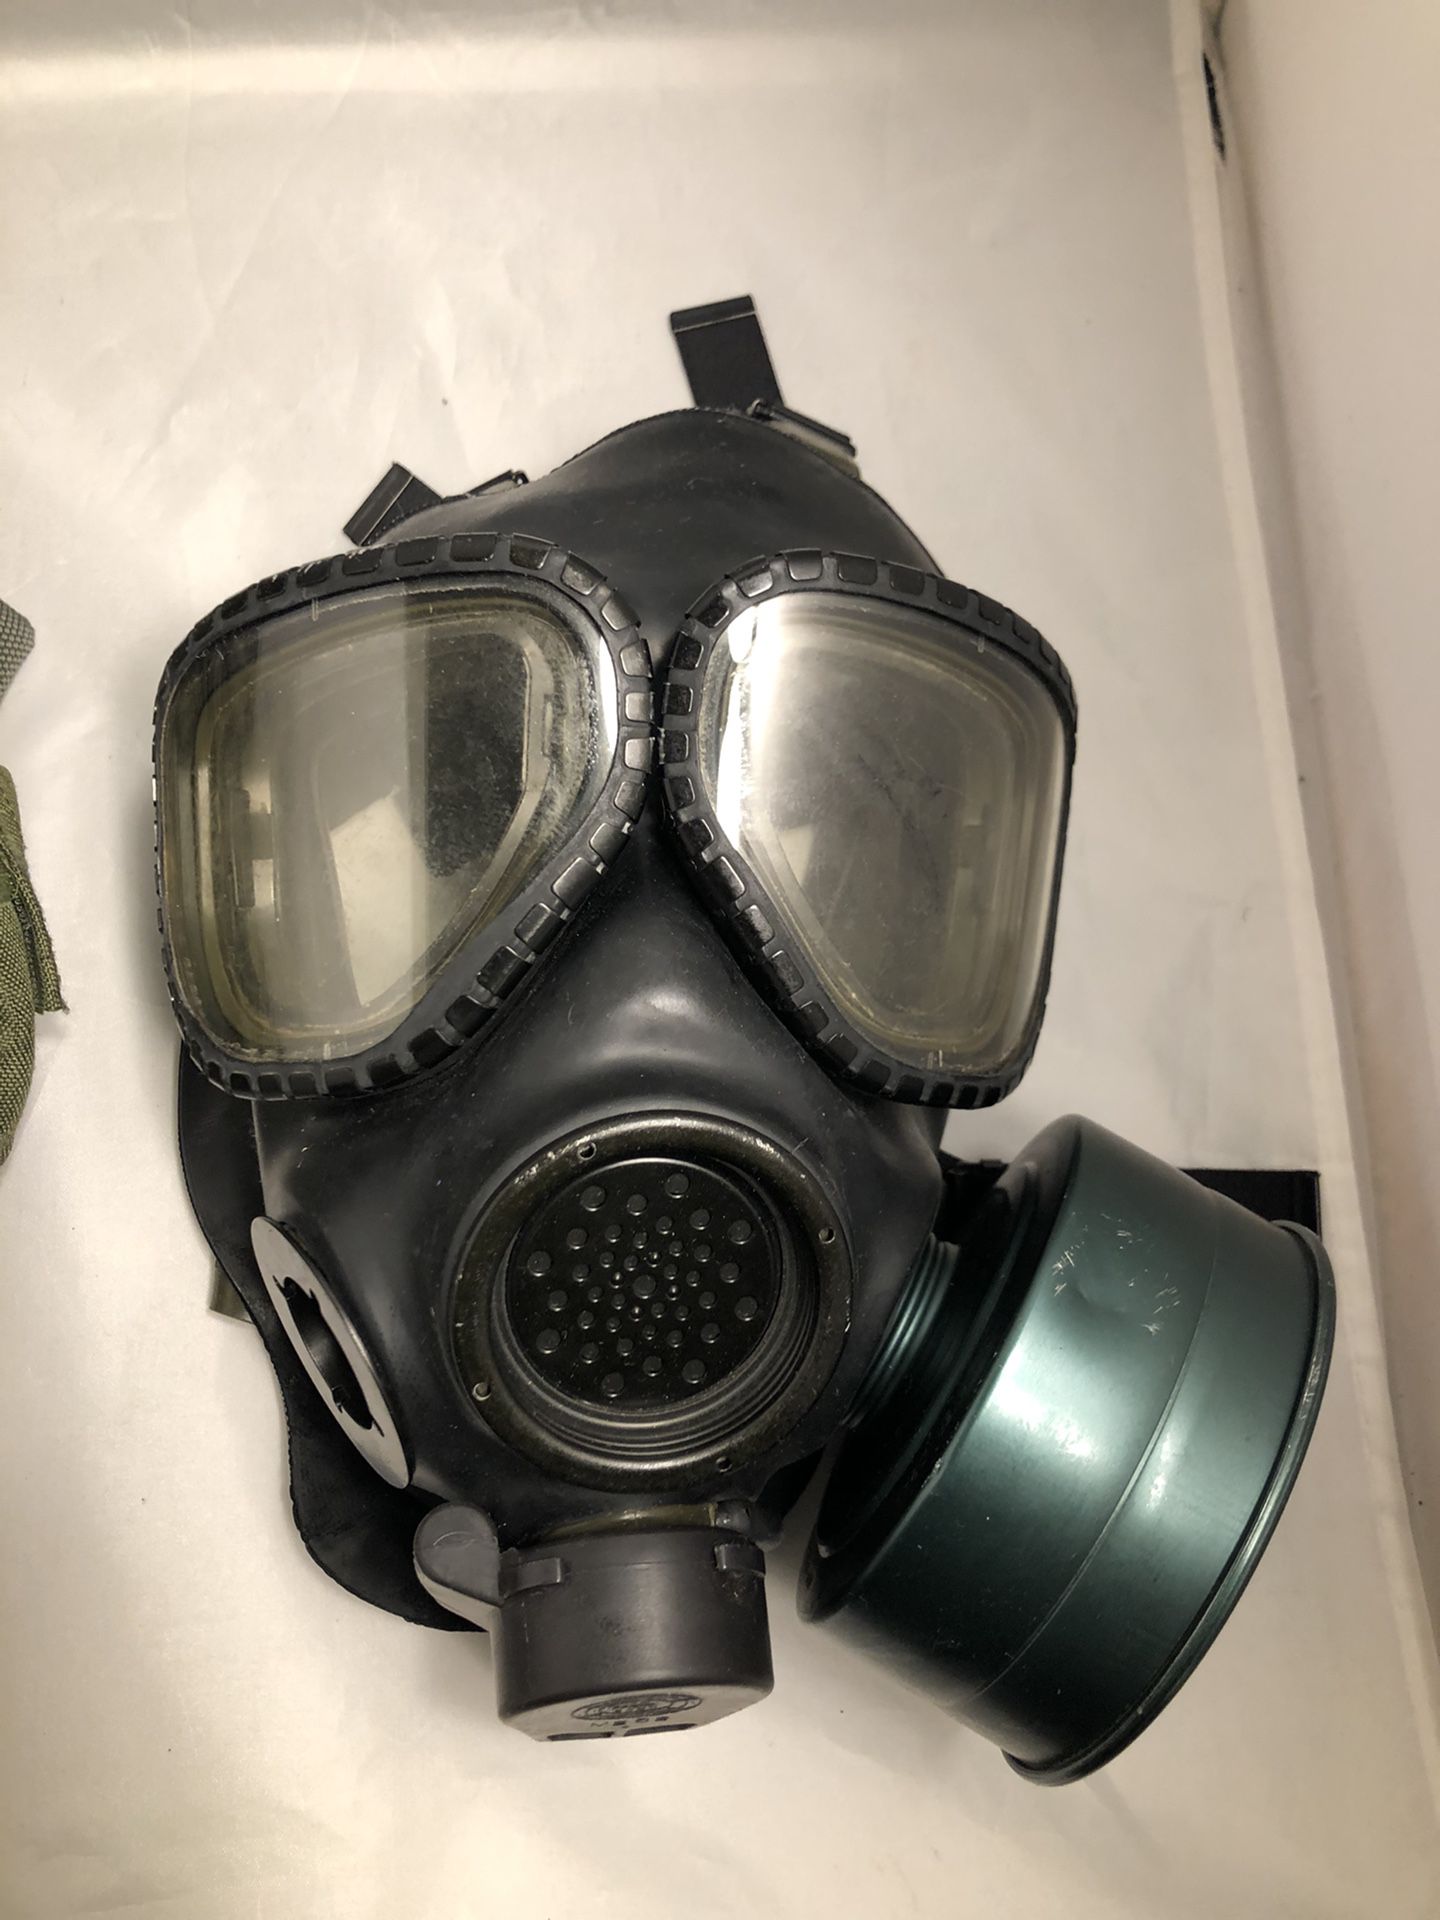 Msa M2 C2 Respirator Gas Face Cover Filter & Mask Ww2 Wwii Bag